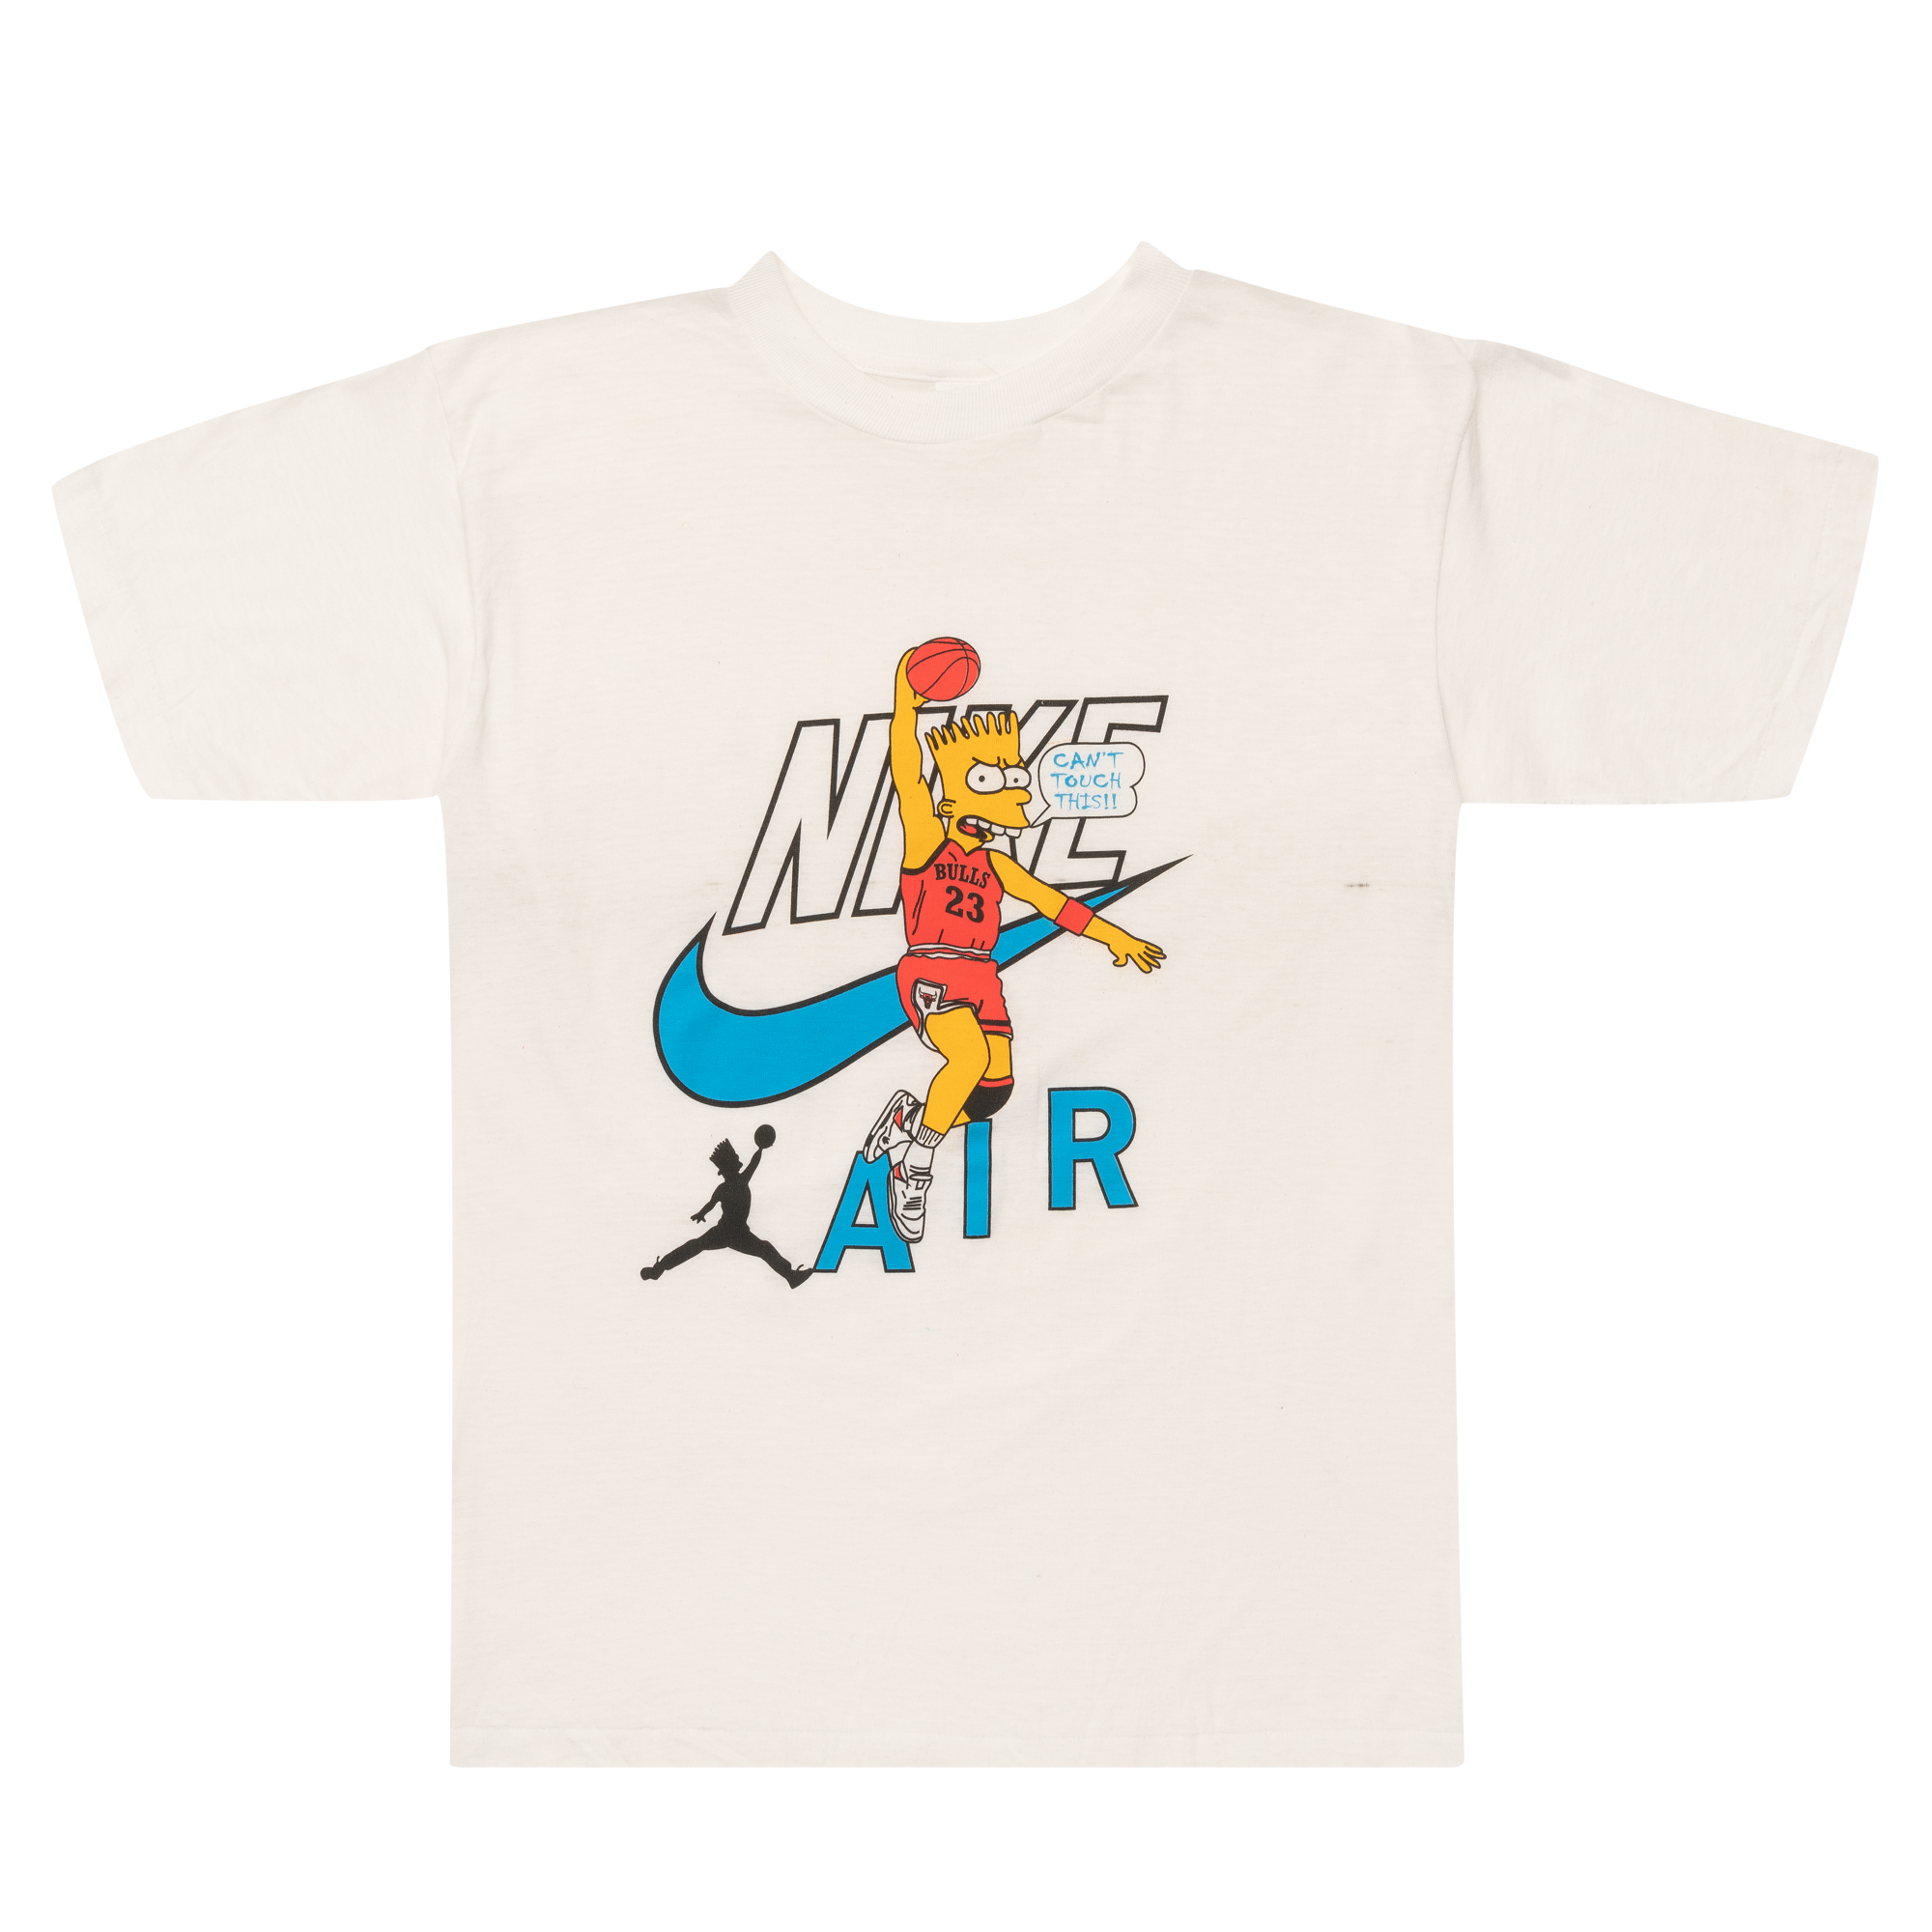 Bart Simpson "Can't Touch This" Tee White-PLUS